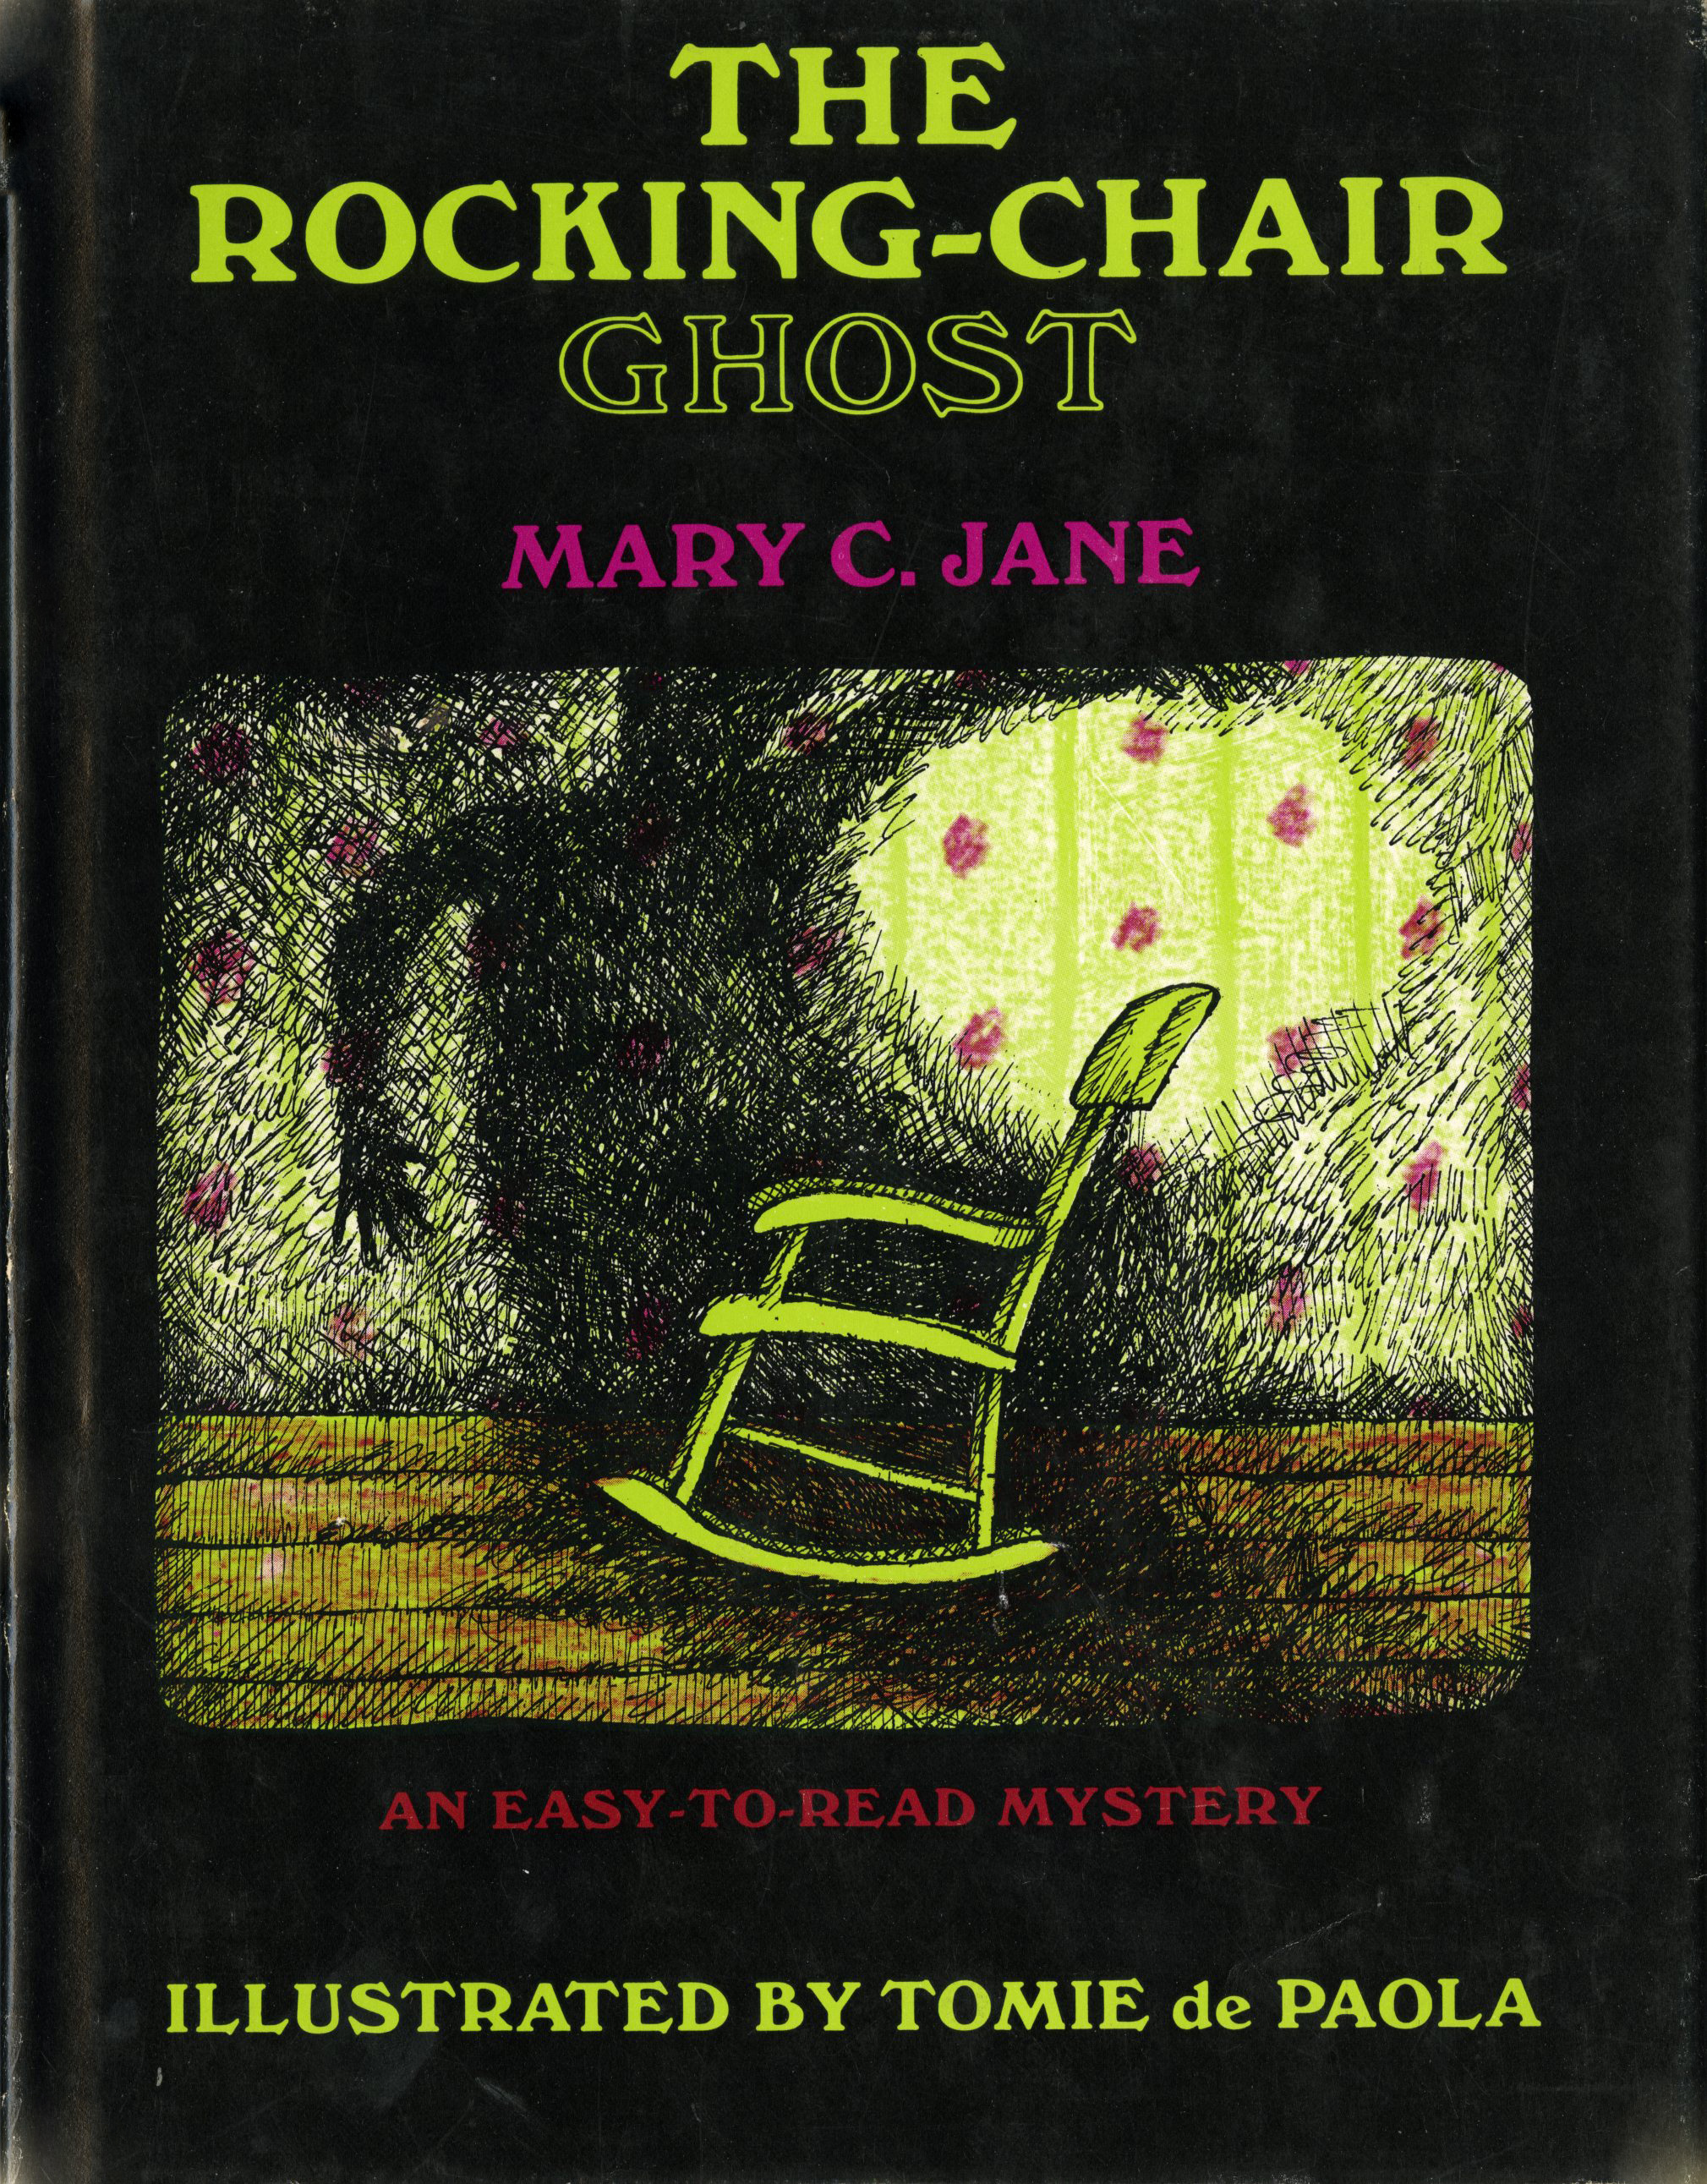 Rocking-Chair Ghost, The Cover.jpg